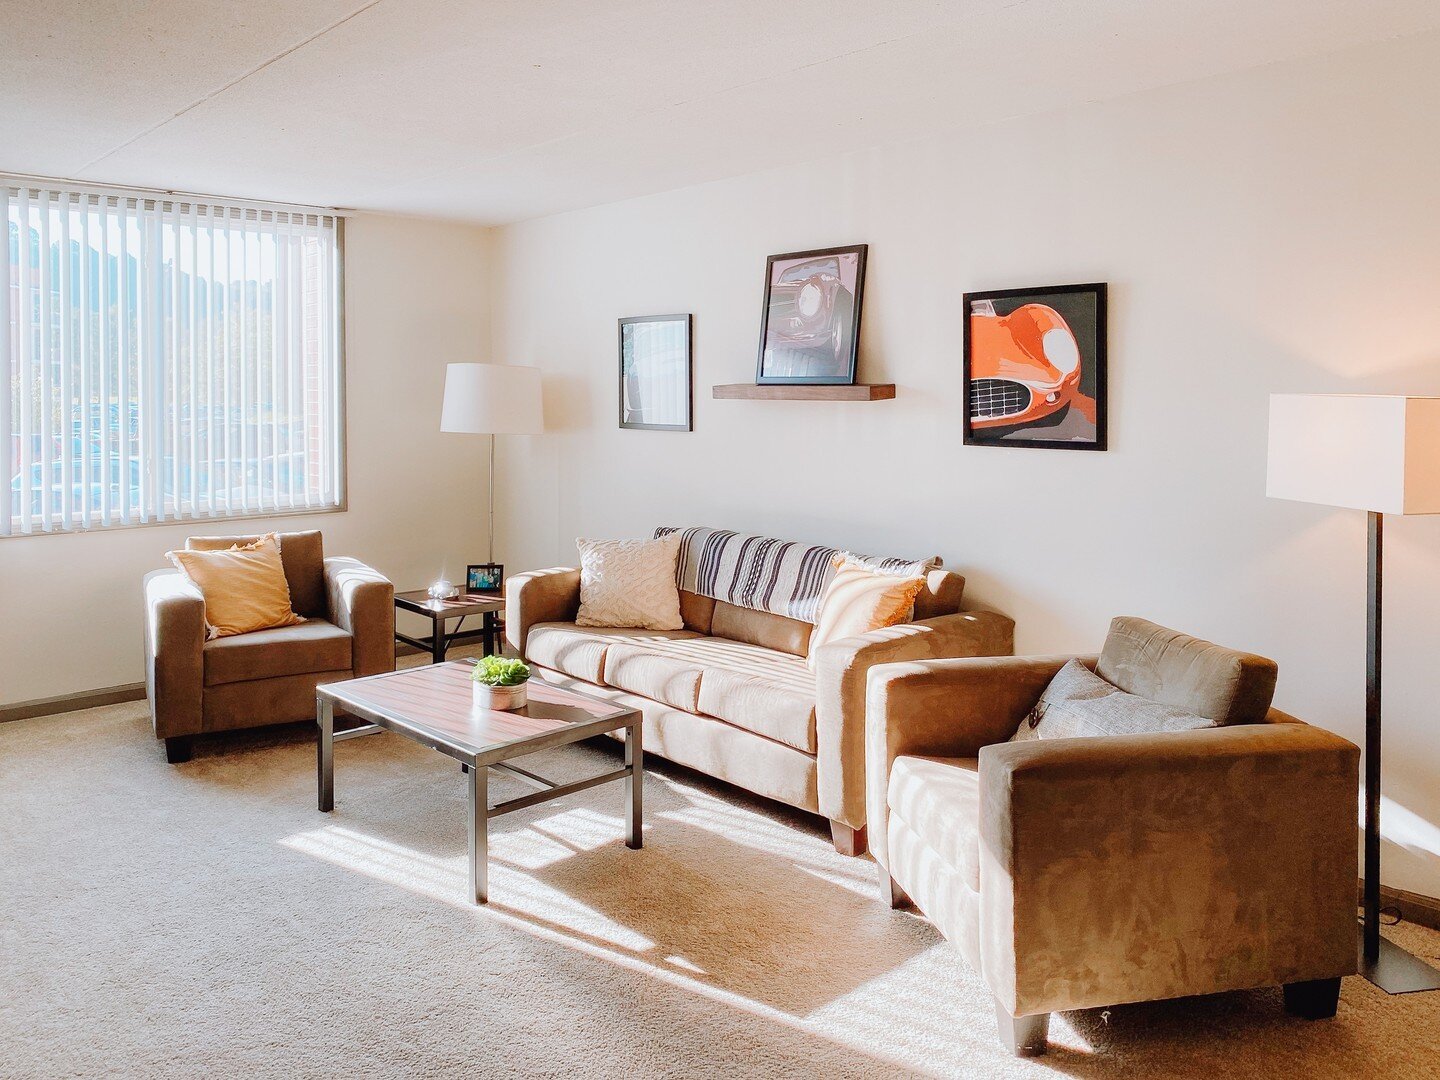 Take a look at our model &amp; amenities while learning all you need to know for finding your new hOUme!🤩⁠
⁠
Schedule by calling our office at 740-593-7783 or visit www.riverparkou.com